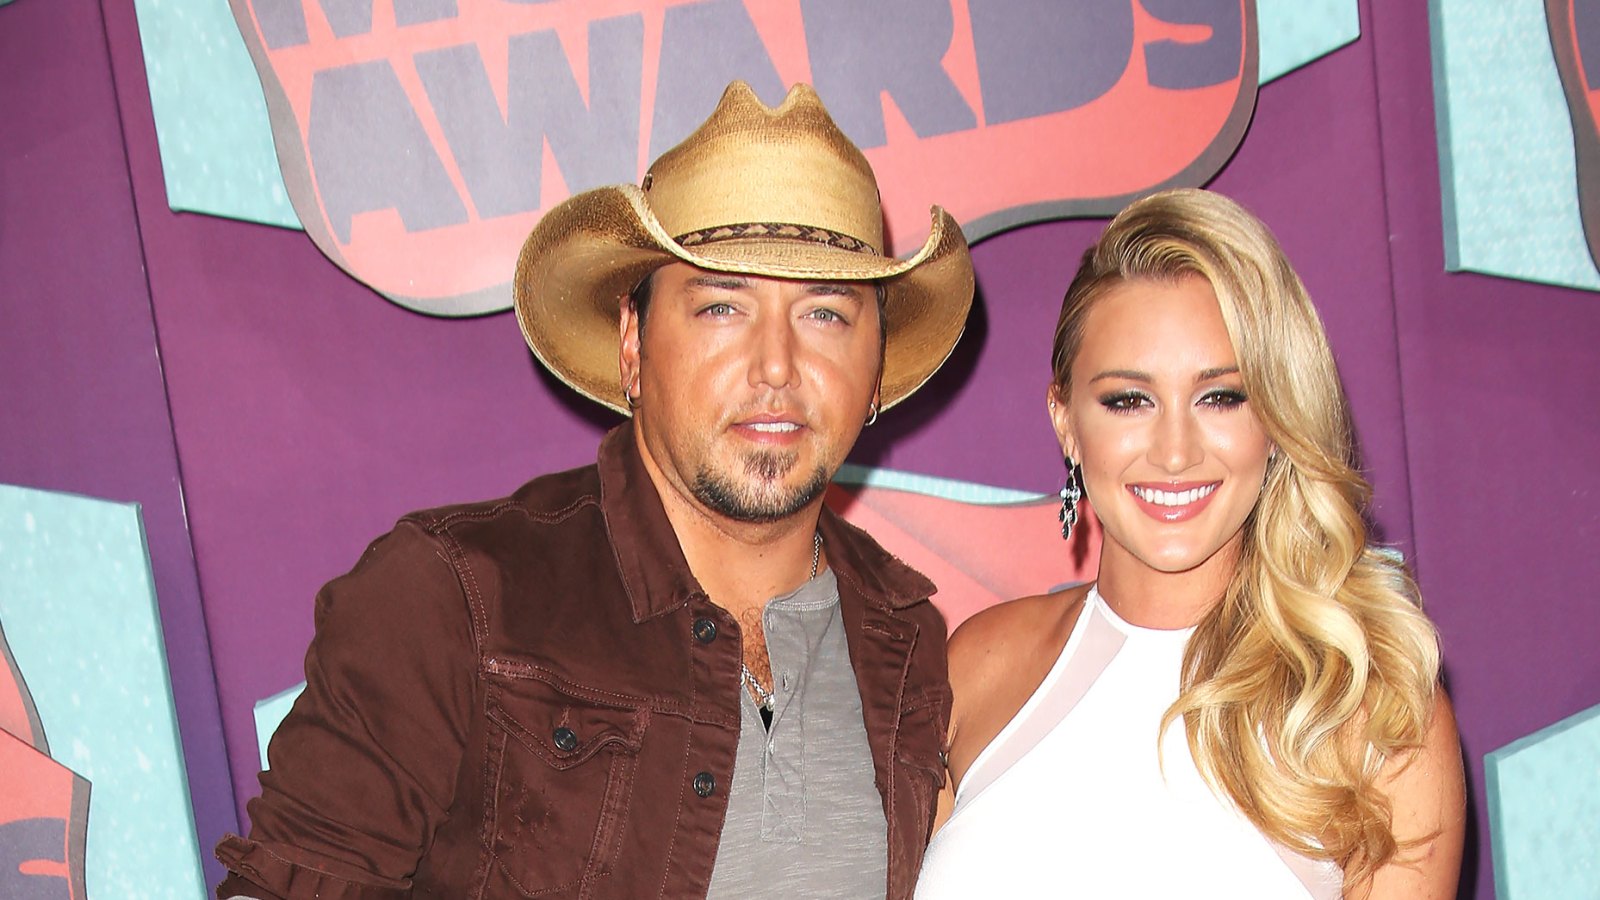 Jason-Aldean--People-Need-to-'Get-Over'-My-Affair-With-Mistress-Brittany-Kerr-Jason-Aldean-Brittany-Kerr